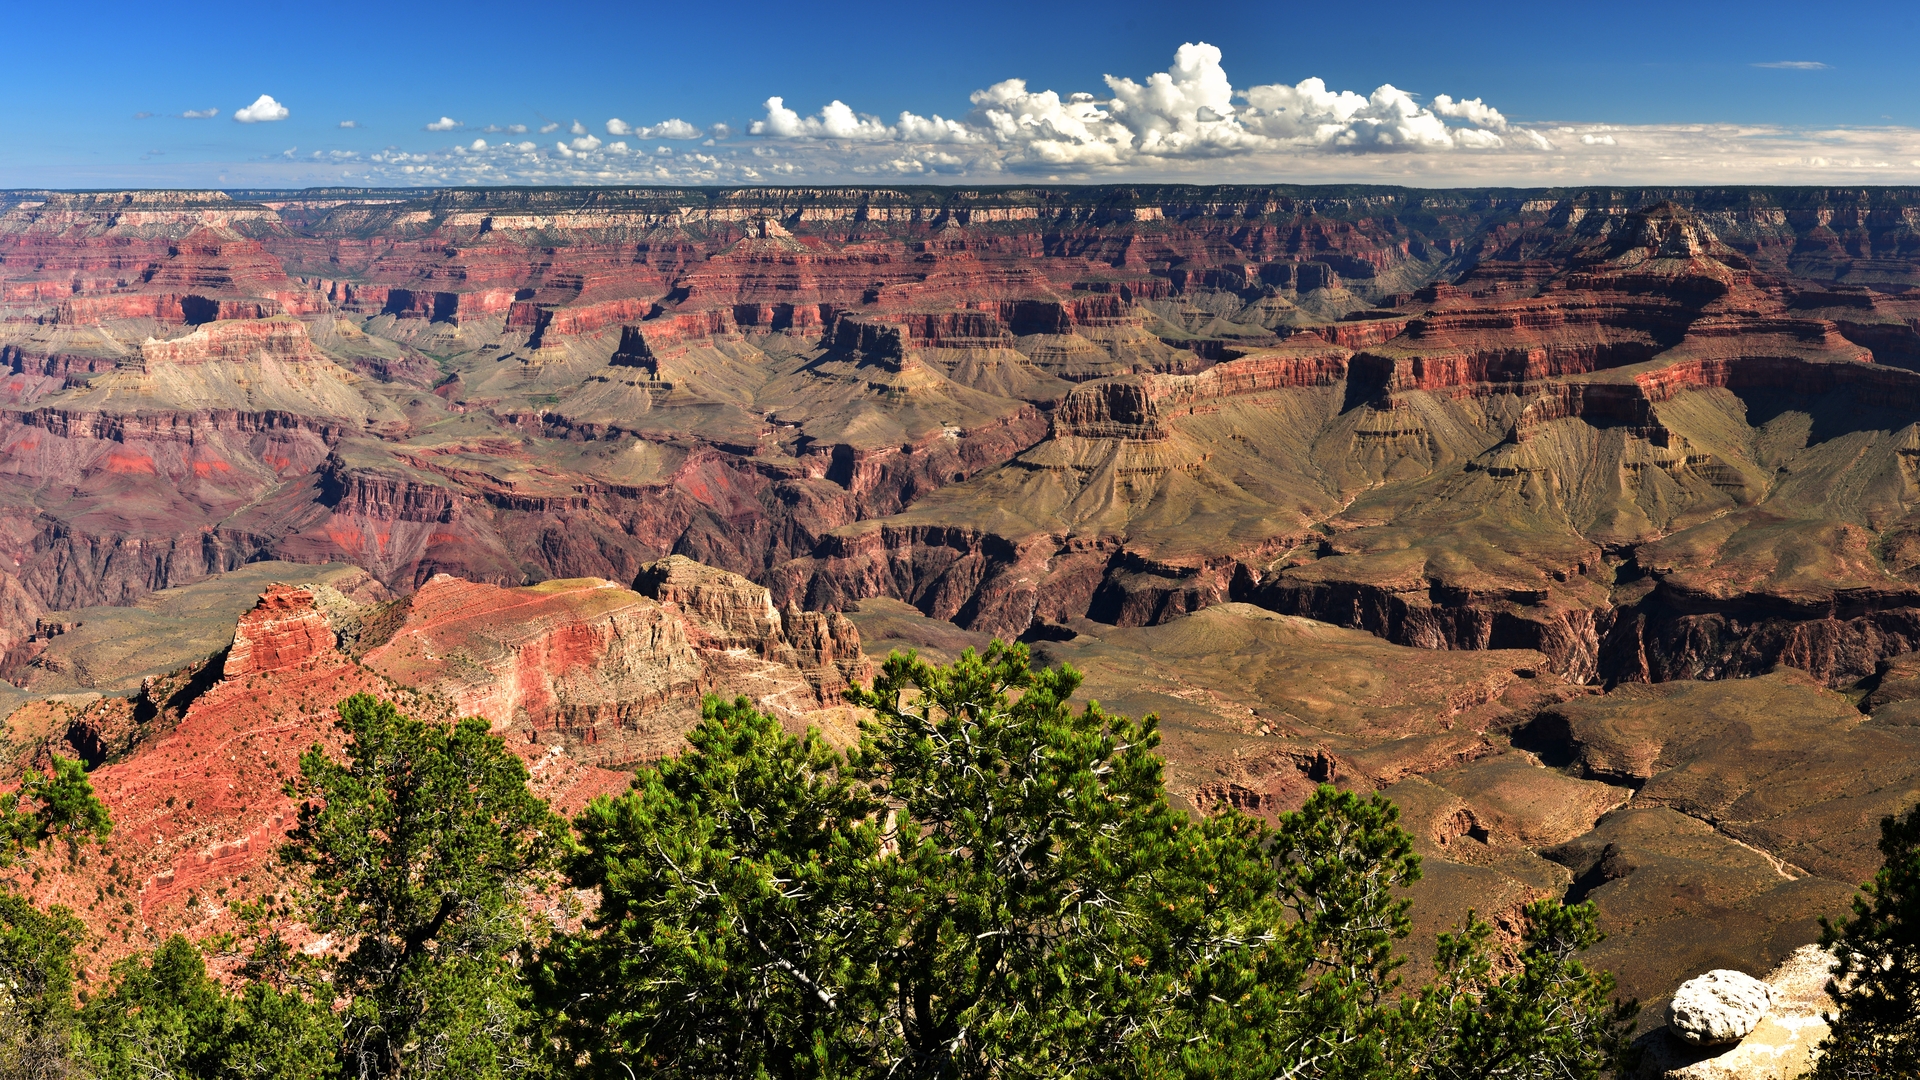 General 1920x1080 landscape Grand Canyon grand  point view Arizona USA nature clouds sky trees canyon